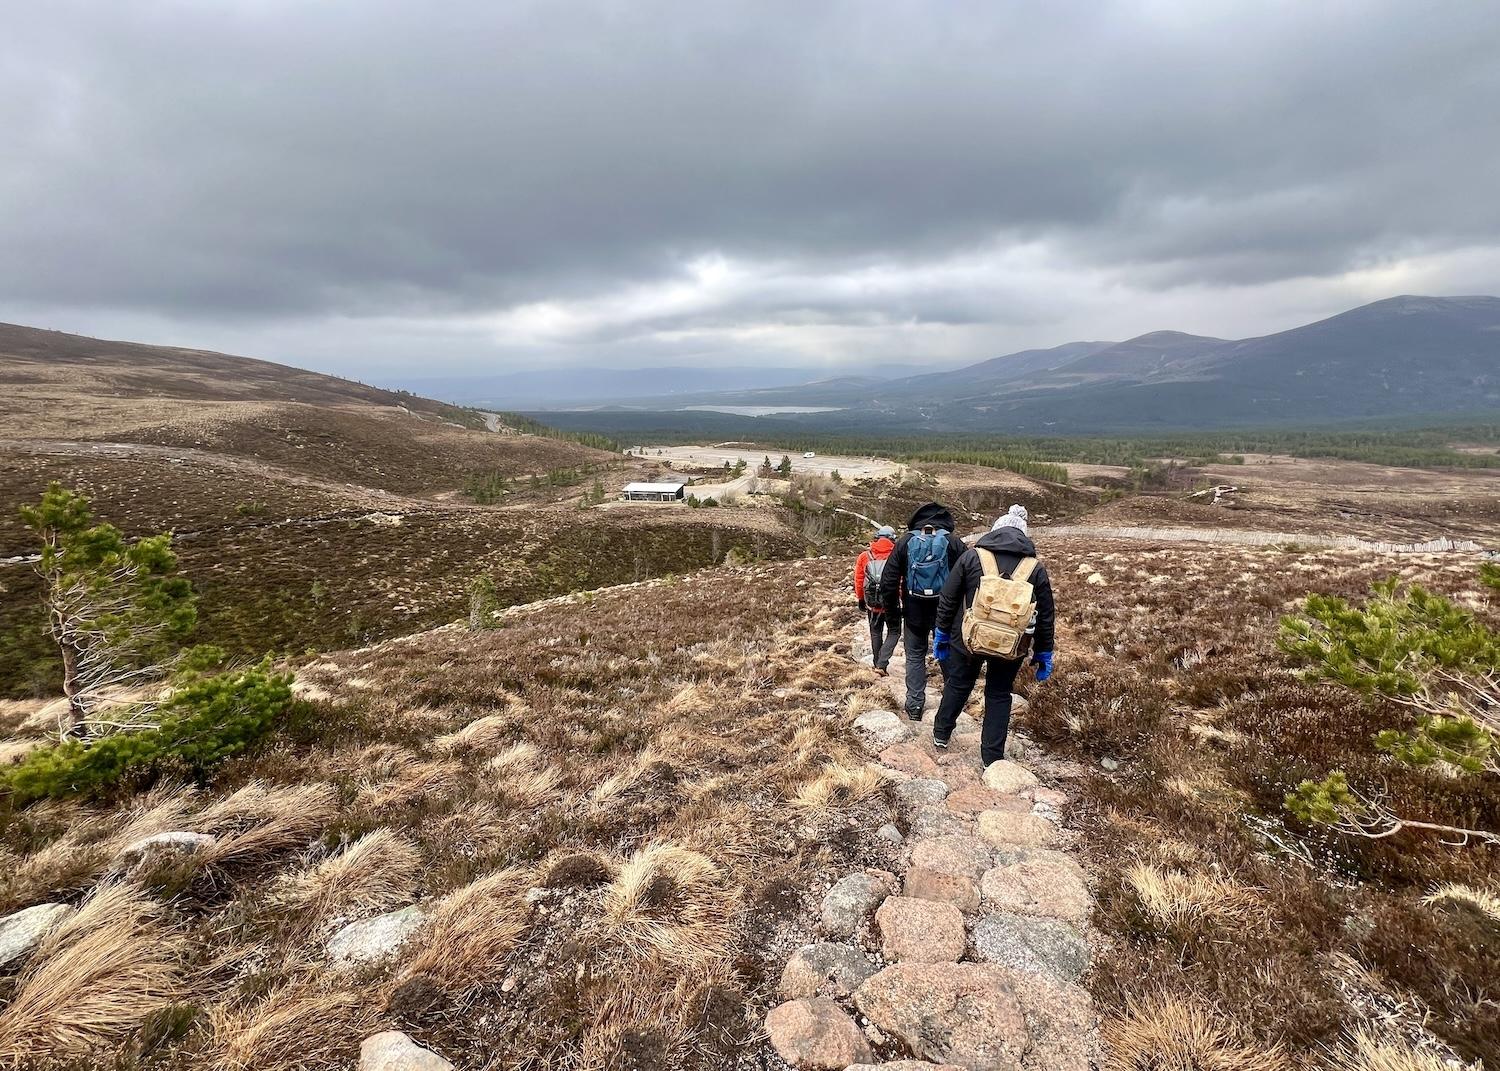 After feeding the free-ranging reindeer in the Cairngorms, our Wilderness Scotland group walks back down to the parking lot.